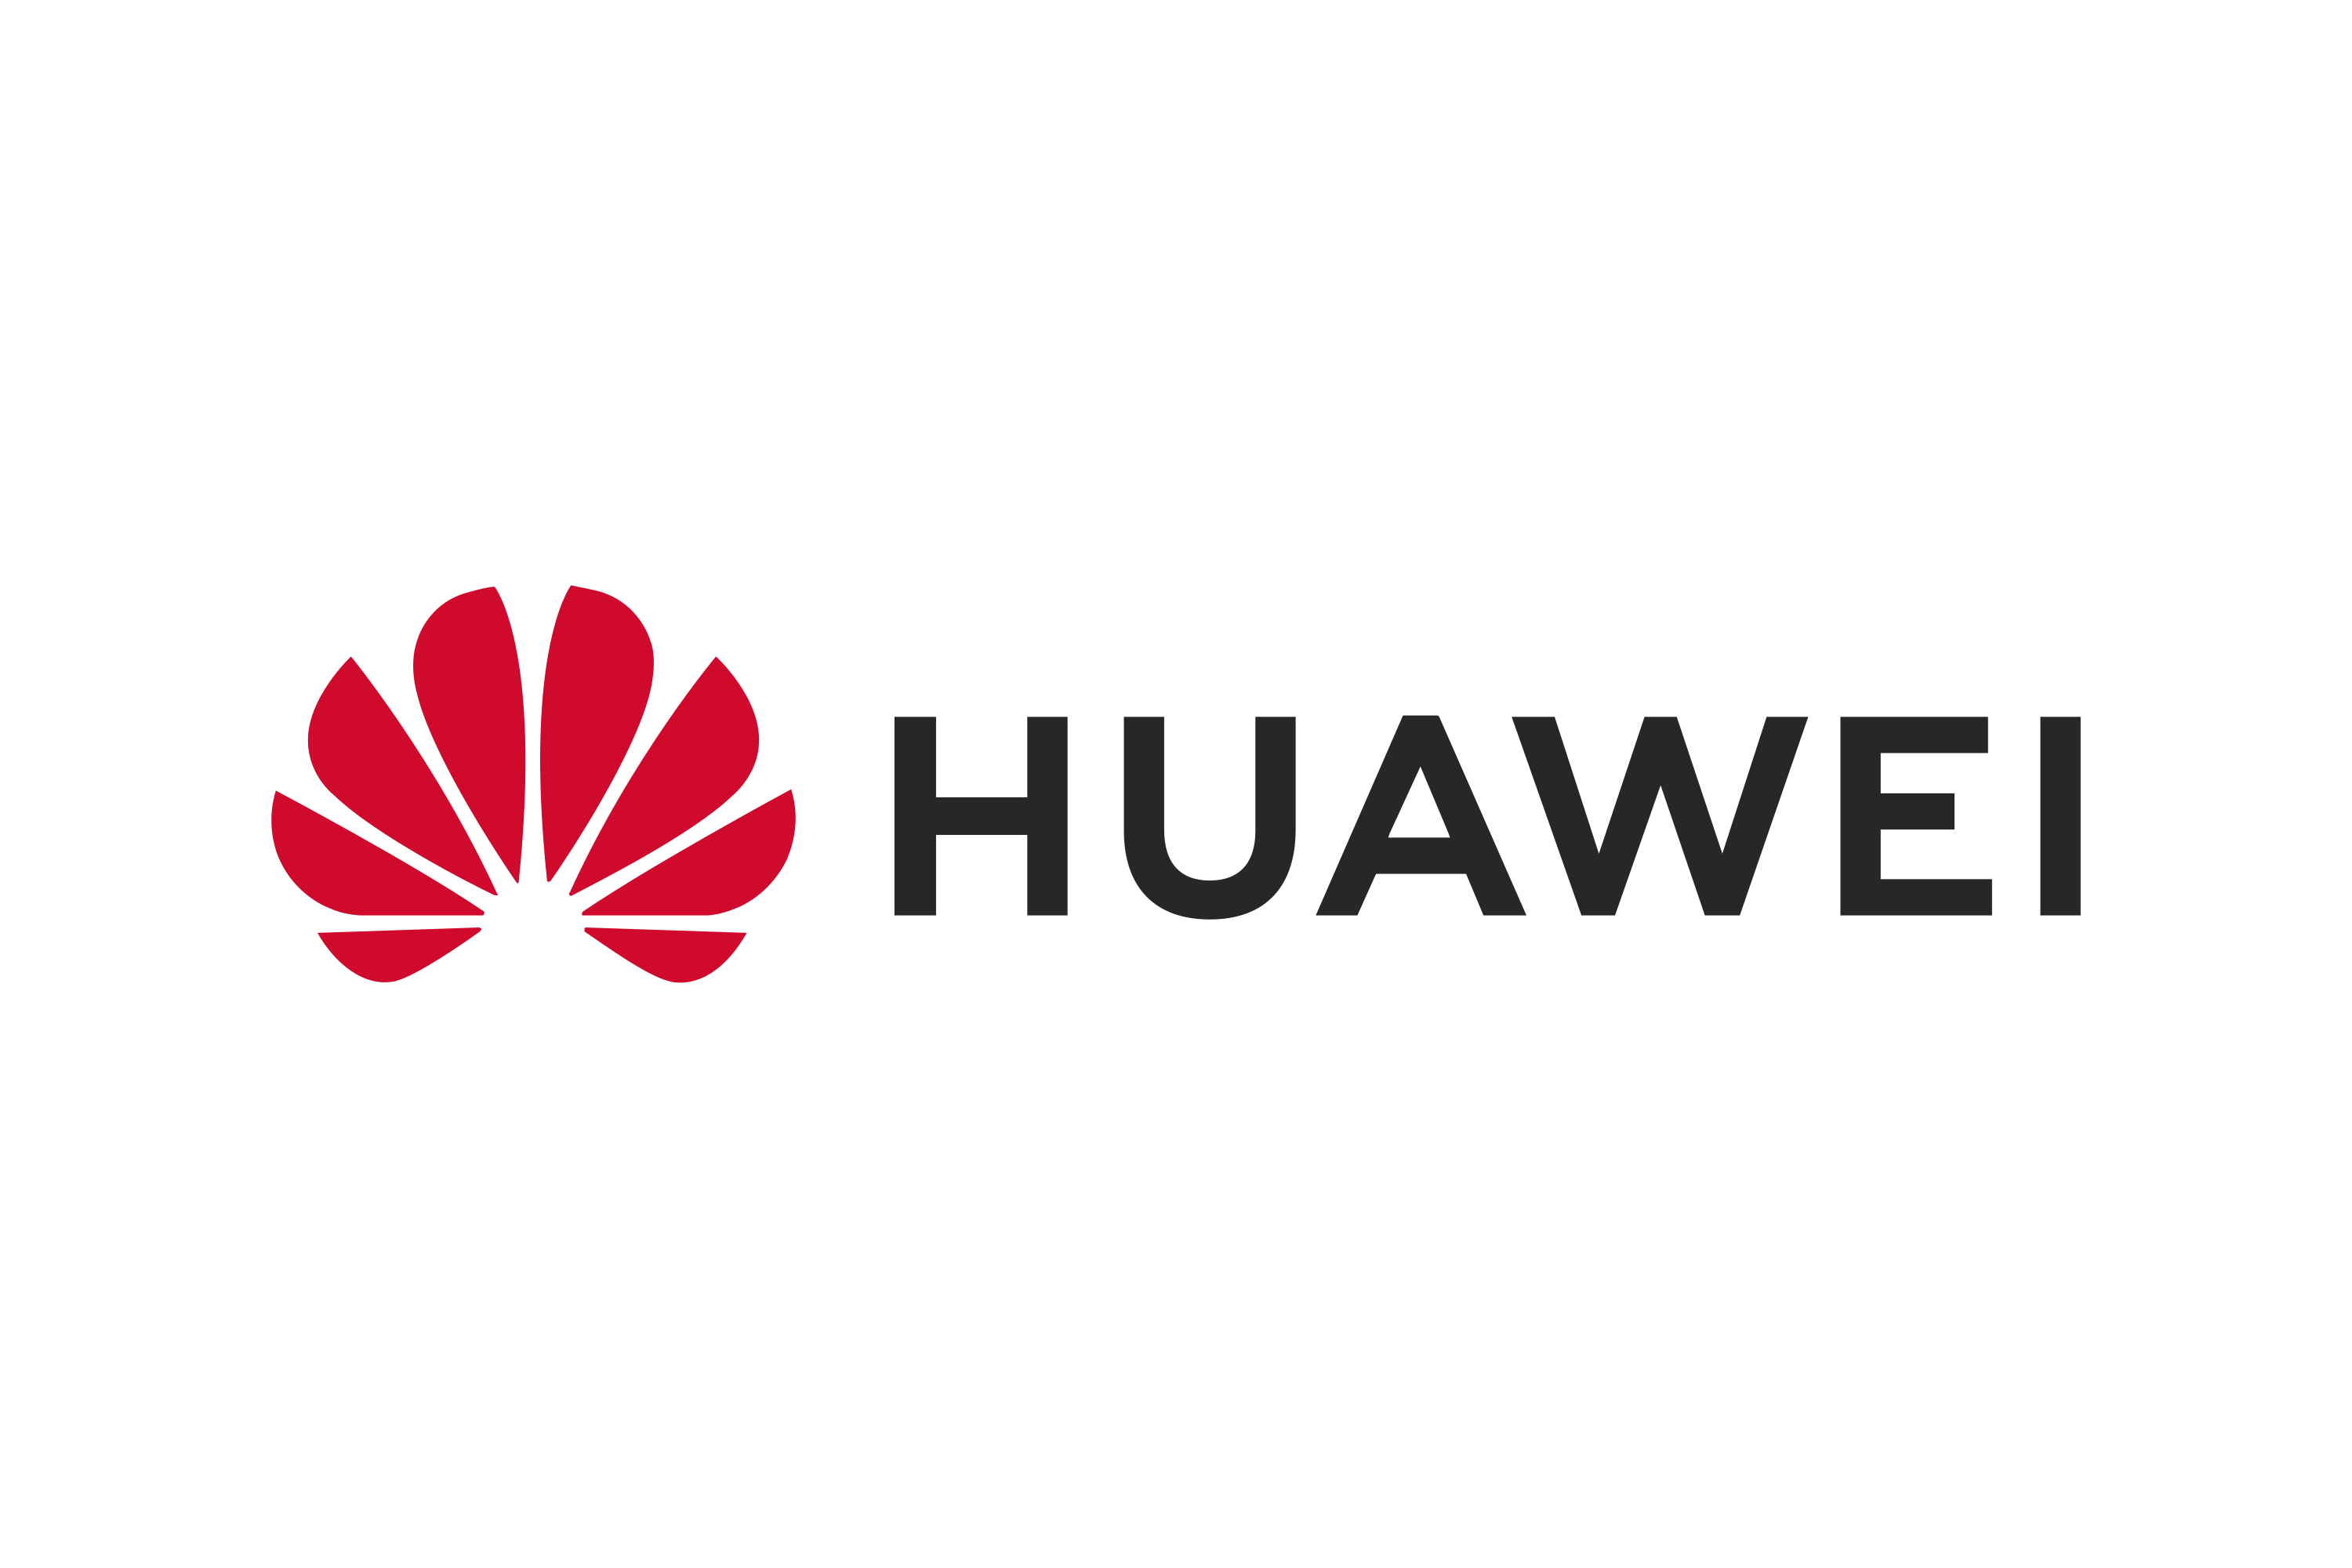 Download Download Huawei Logo in SVG Vector or PNG File Format ...